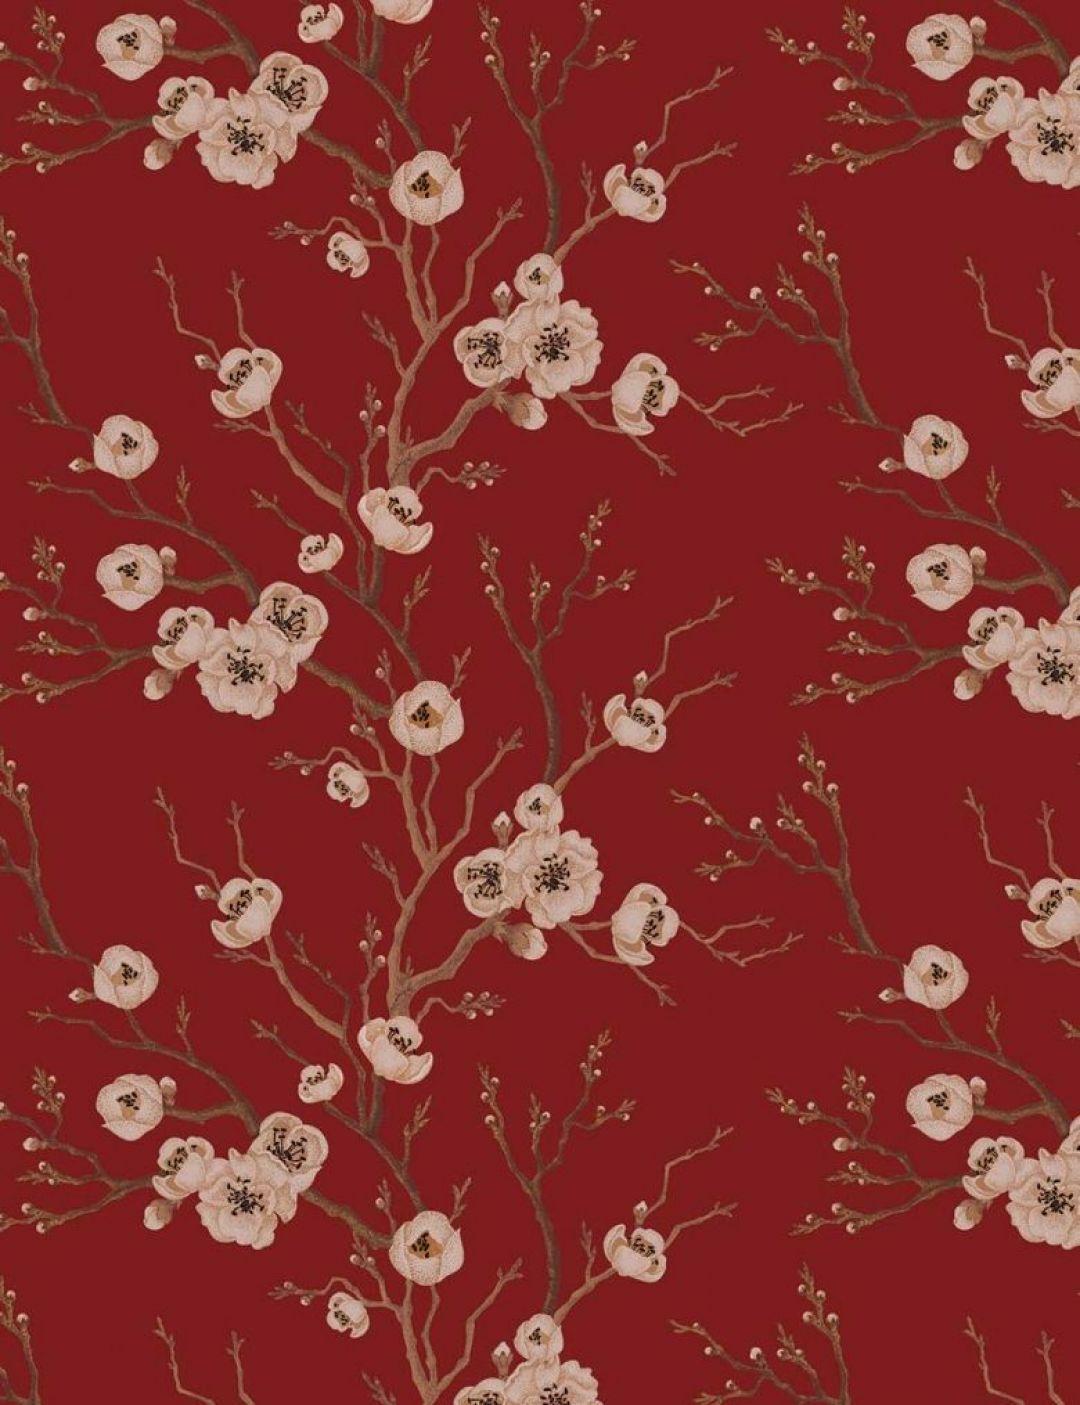 Red wallpaper with a branch of flowers - Cherry